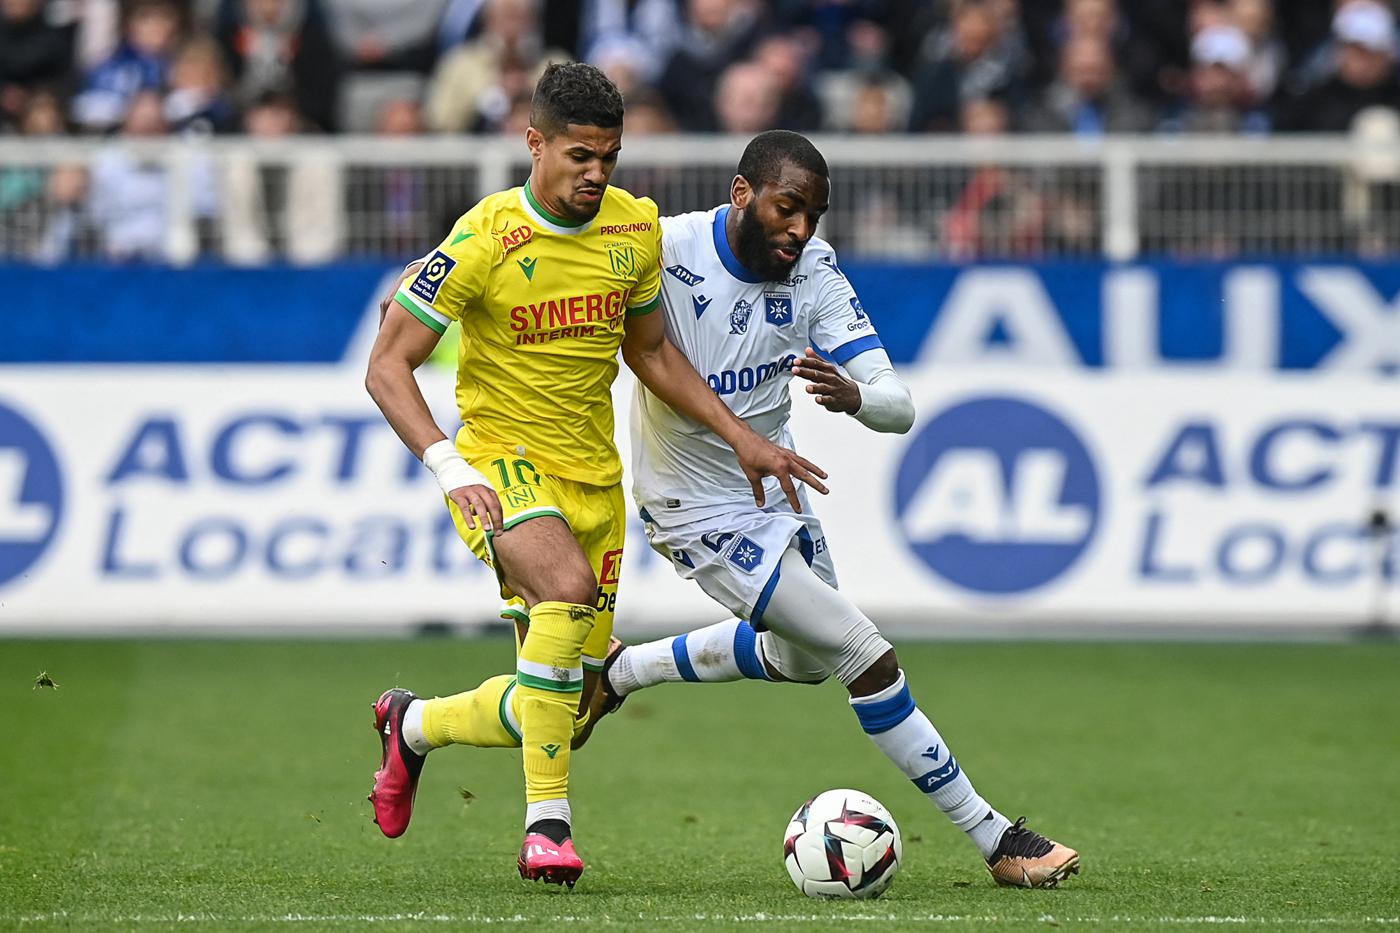 statistics Auxerre - Nantes - 2:1. French Championship, round 31. Match review,